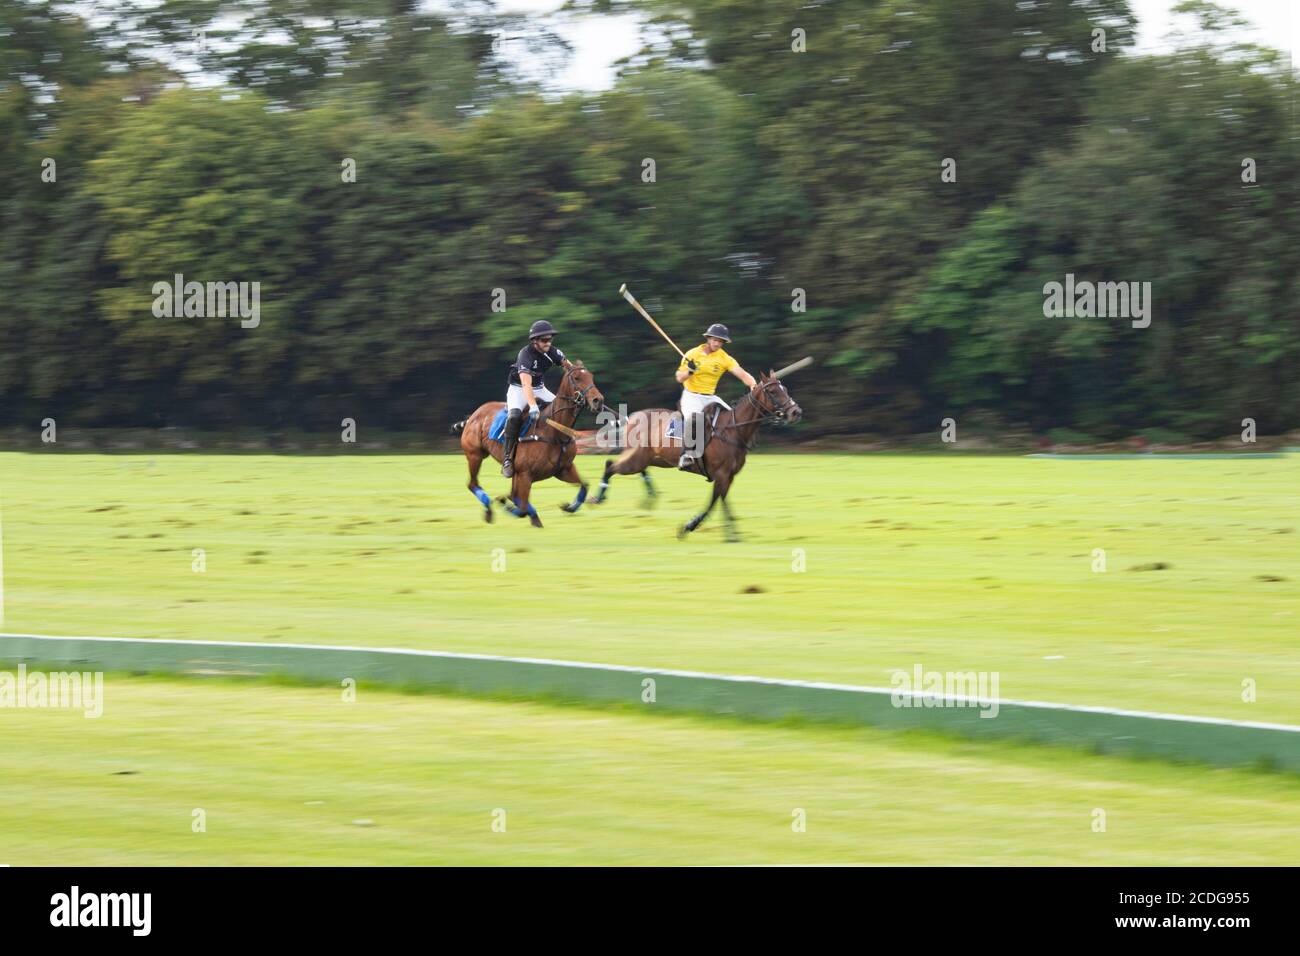 Polo players taking part in a competitive match in Cirencester Park in Gloucestershire. Known as 'The Sport of Kings'. A game consists of 8 chukkas. Stock Photo